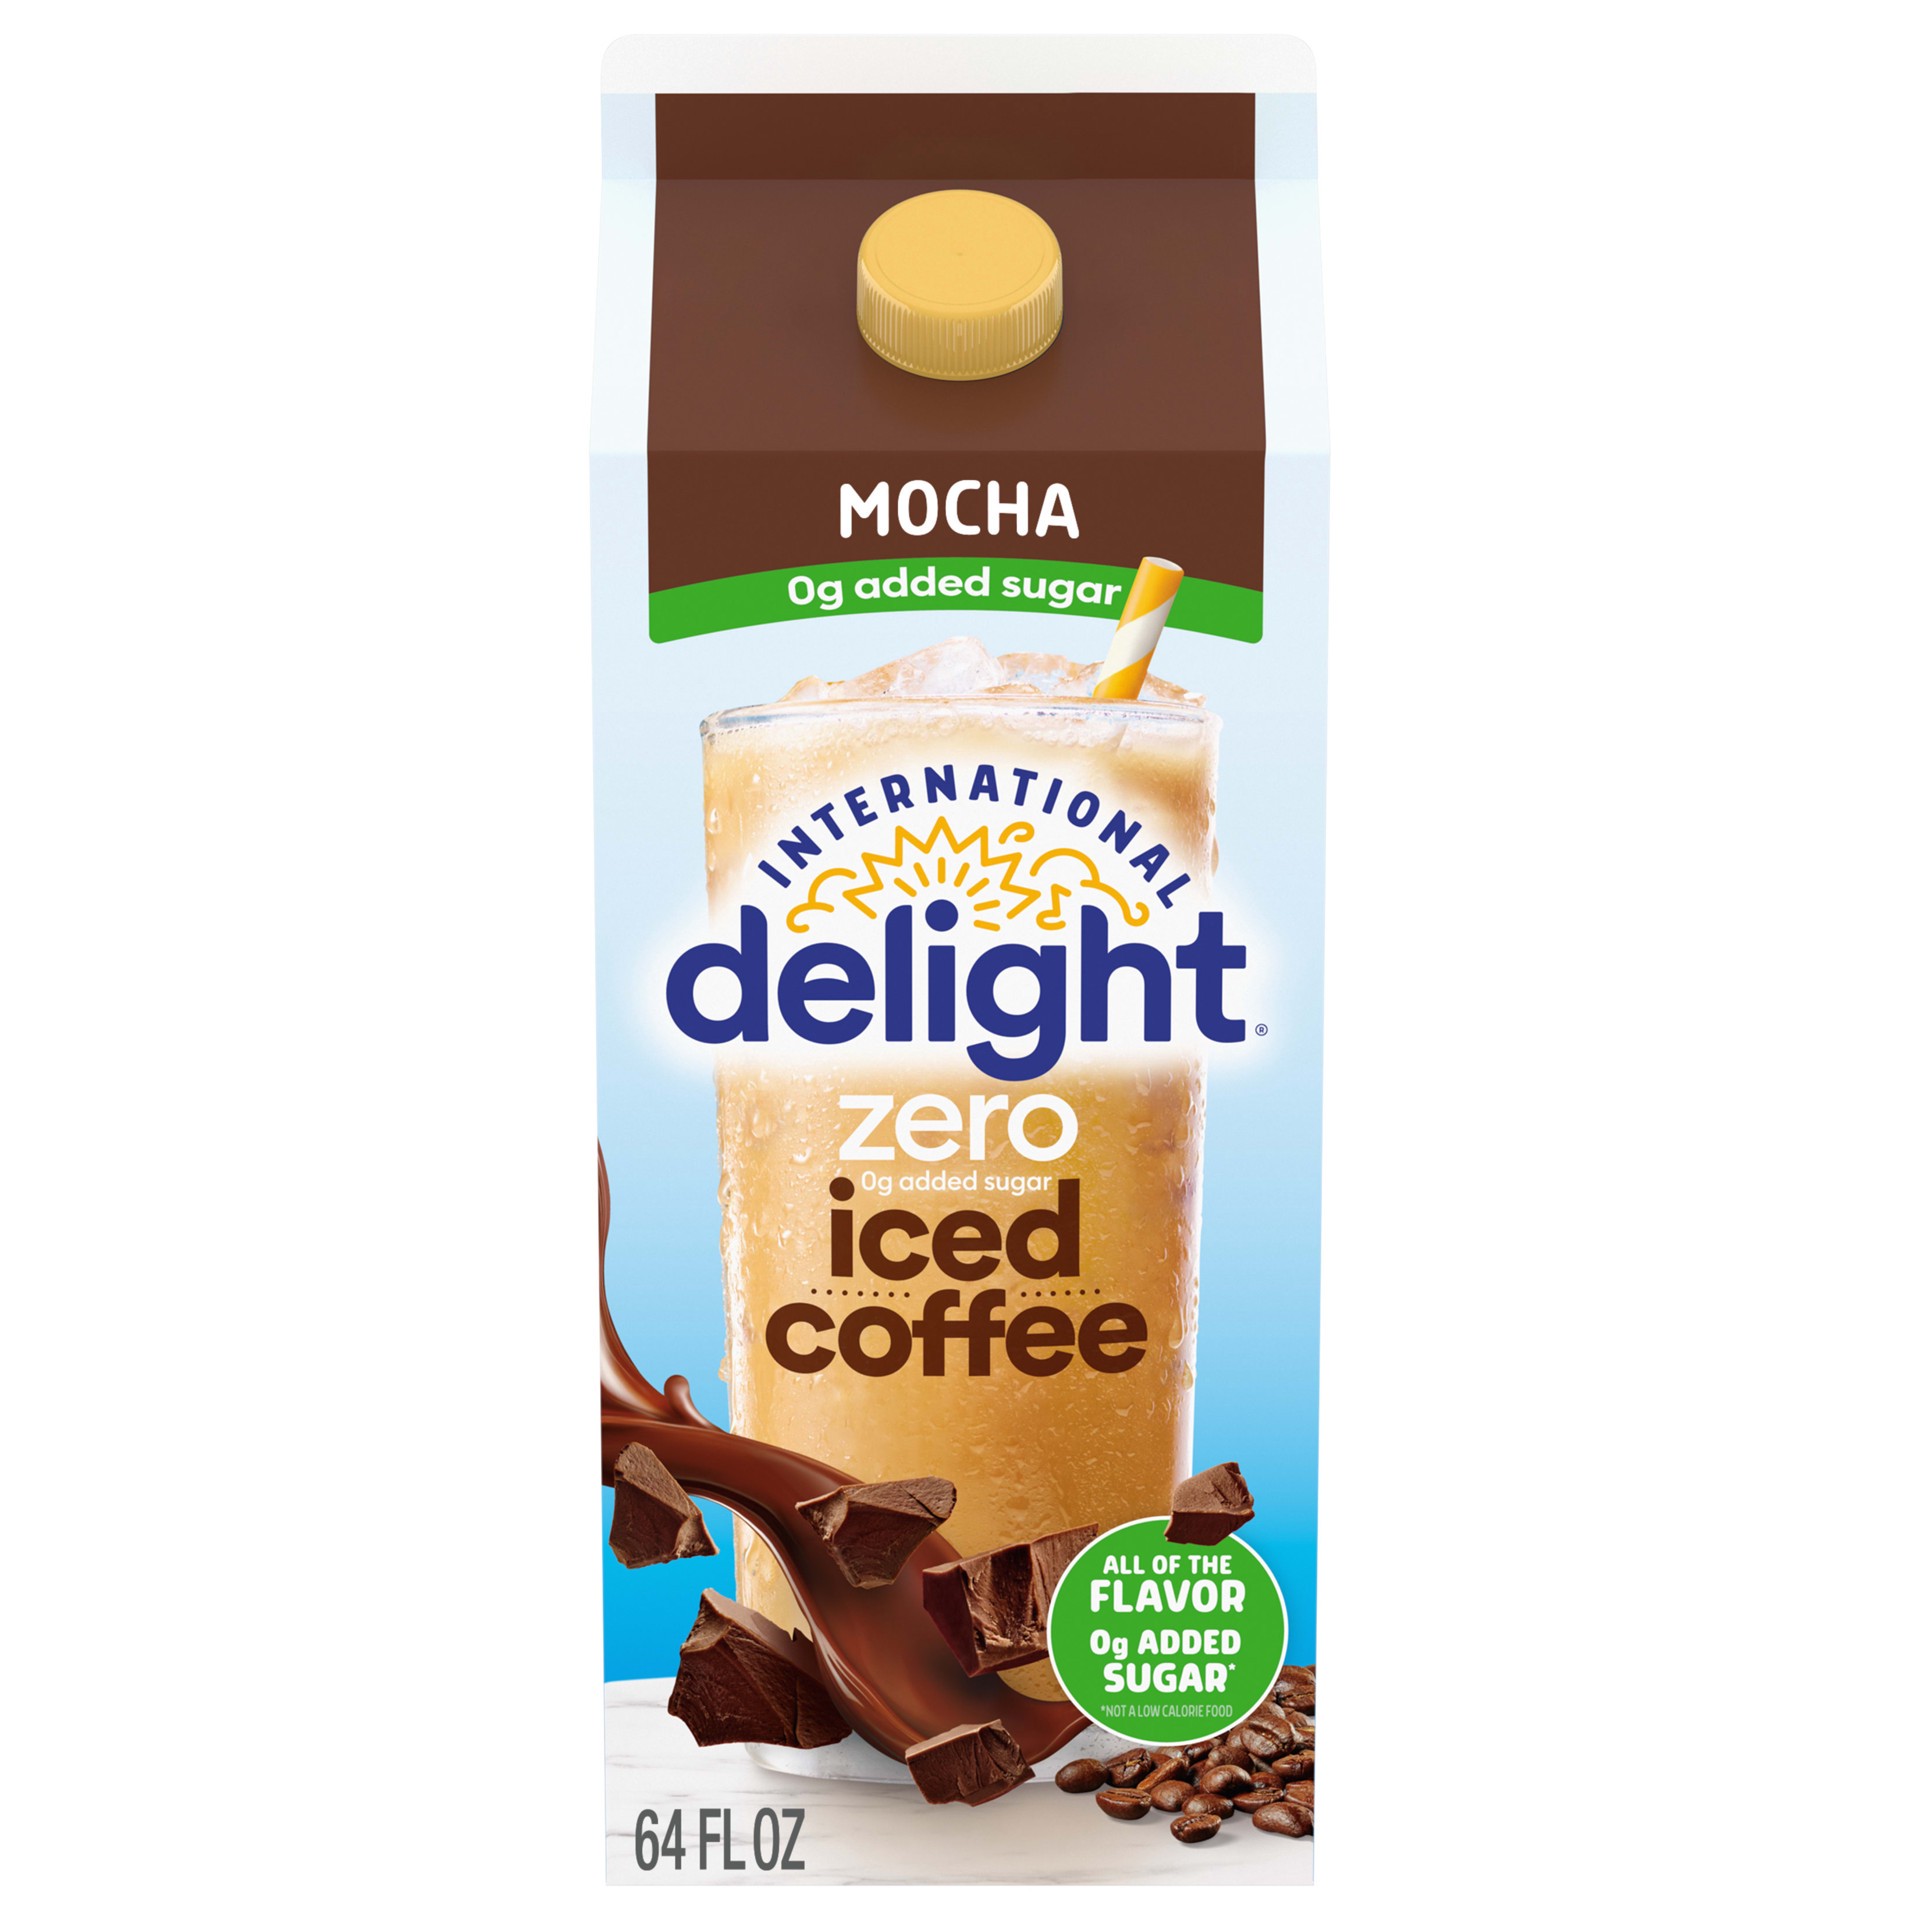 slide 1 of 9, International Delight Zero Iced Coffee, 0g Added Sugar, Mocha, Ready to Pour Coffee Drinks Made with Real Milk and Cream, 64 FL OZ Carton, 64 fl oz